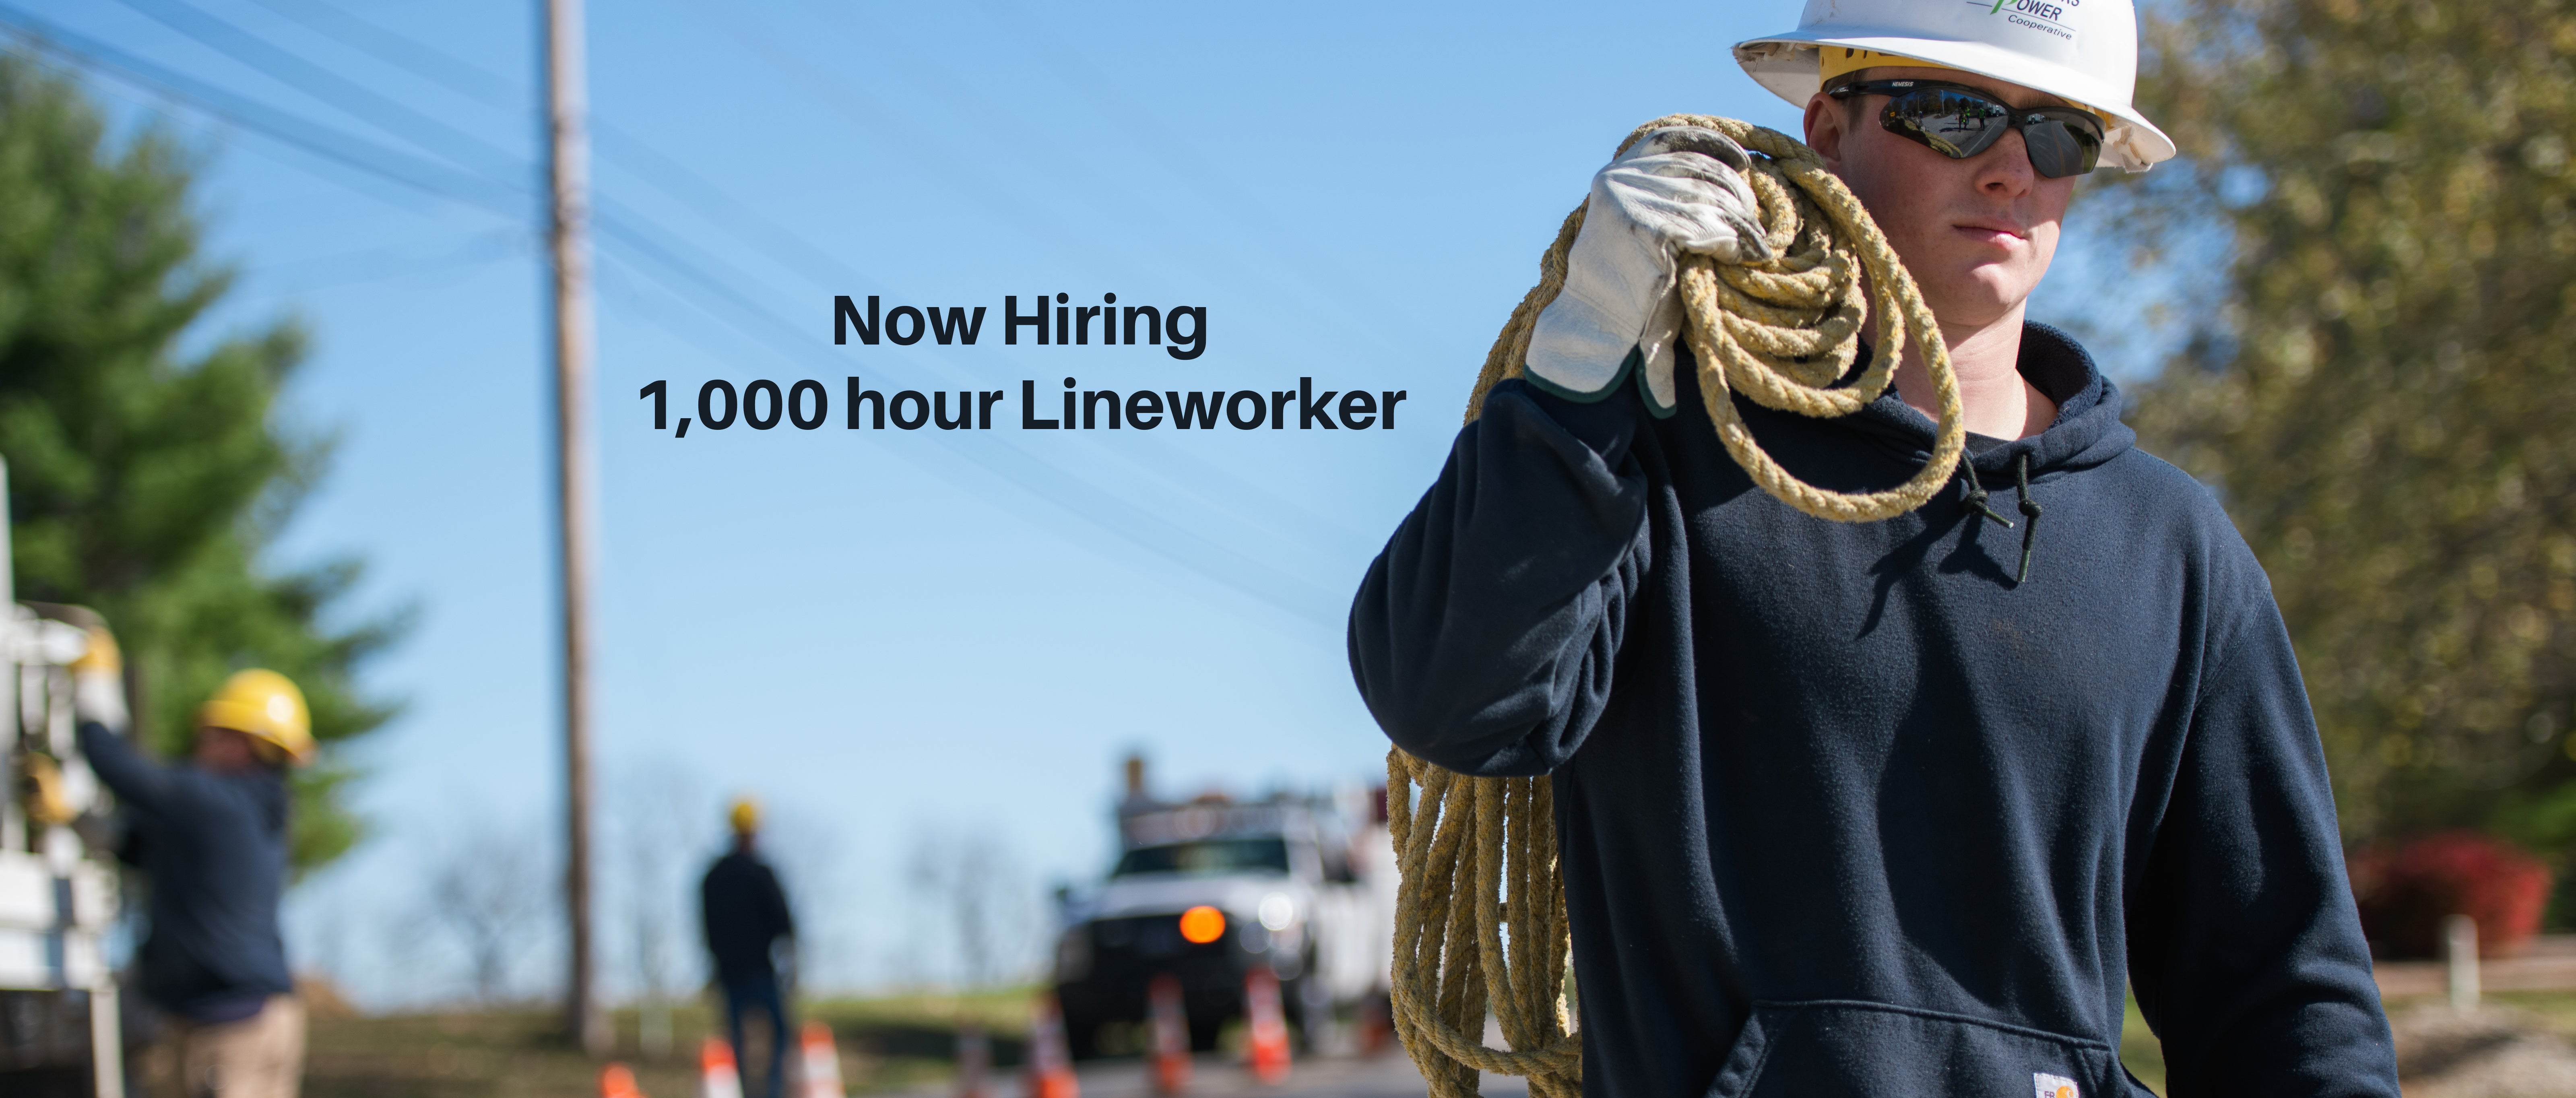 Lineworker carrying a rope - "Now Hiring 1,000 hour Lineworker"